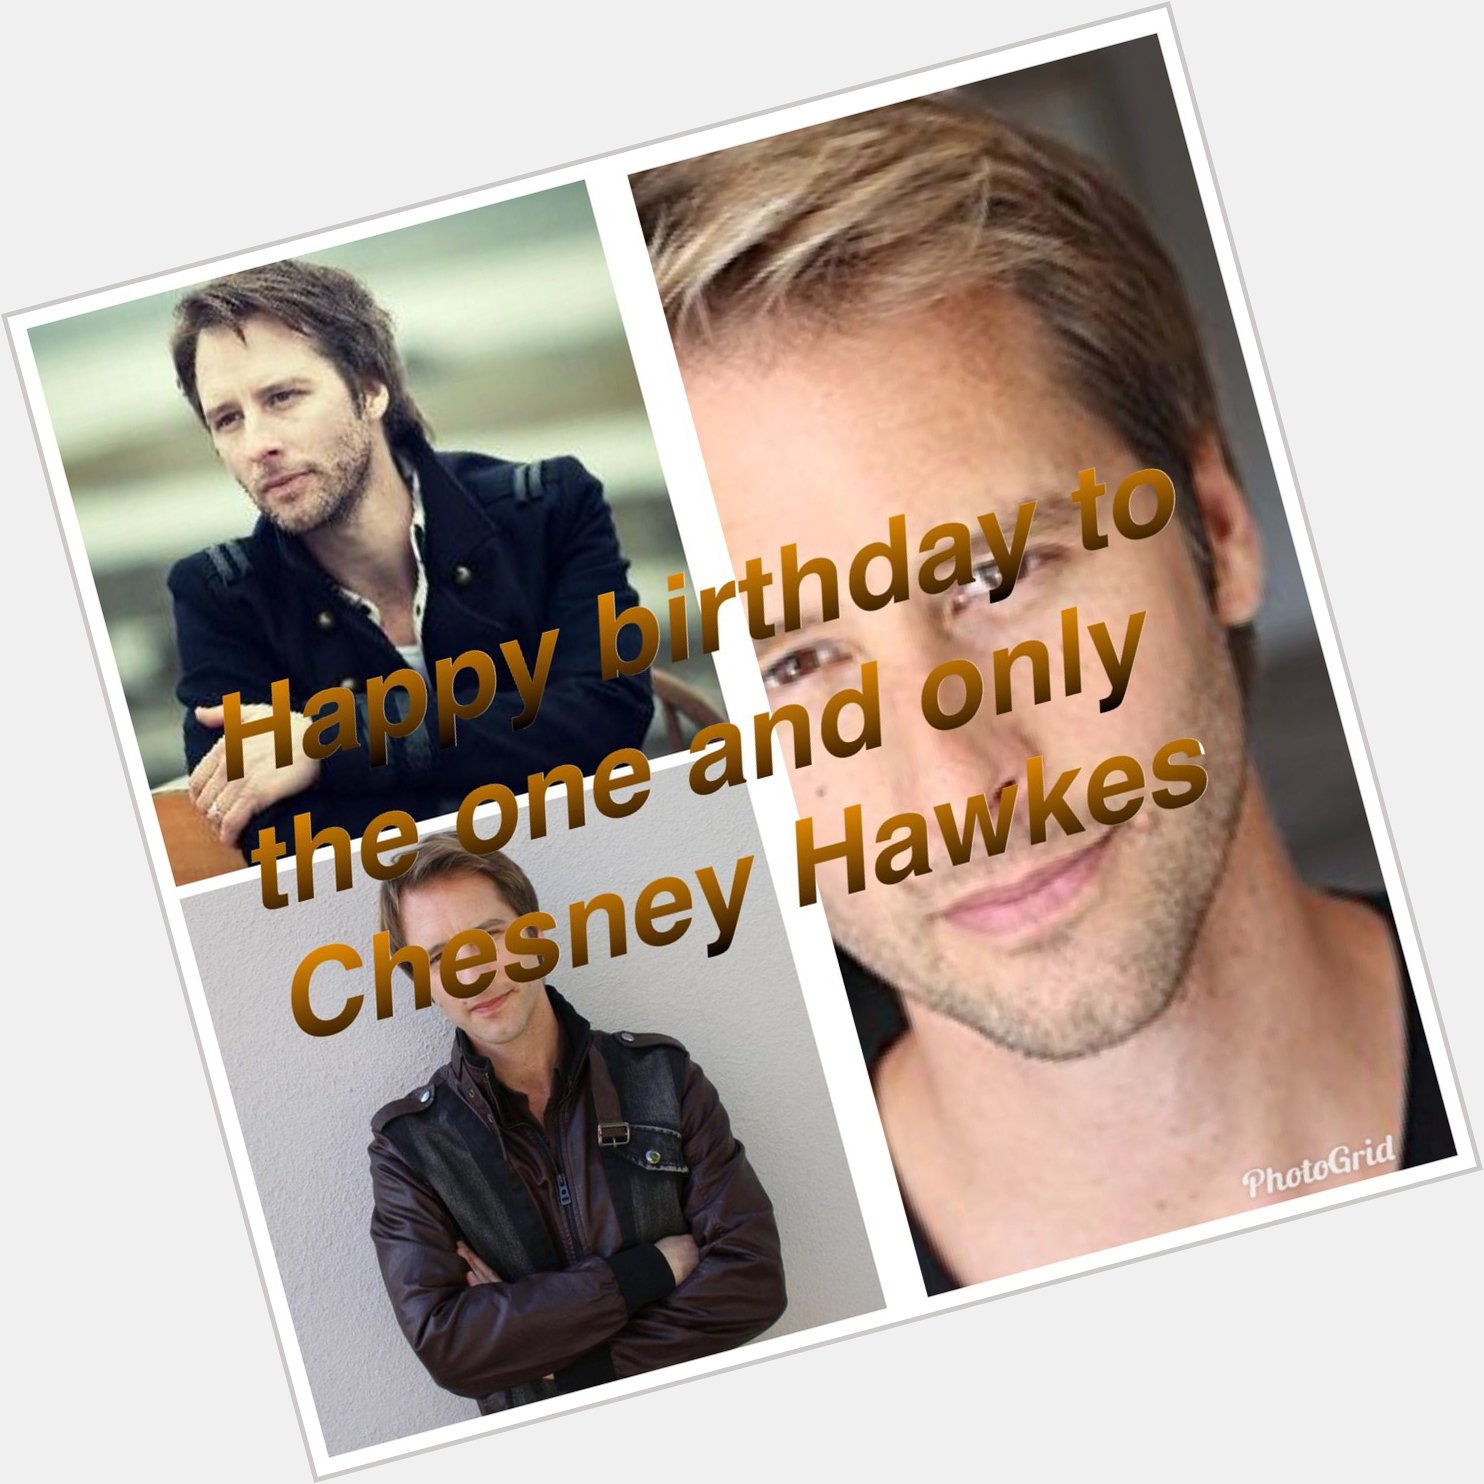 Happy birthday to the one and only chesney hawkes. Enjoy your birthday and your special day 